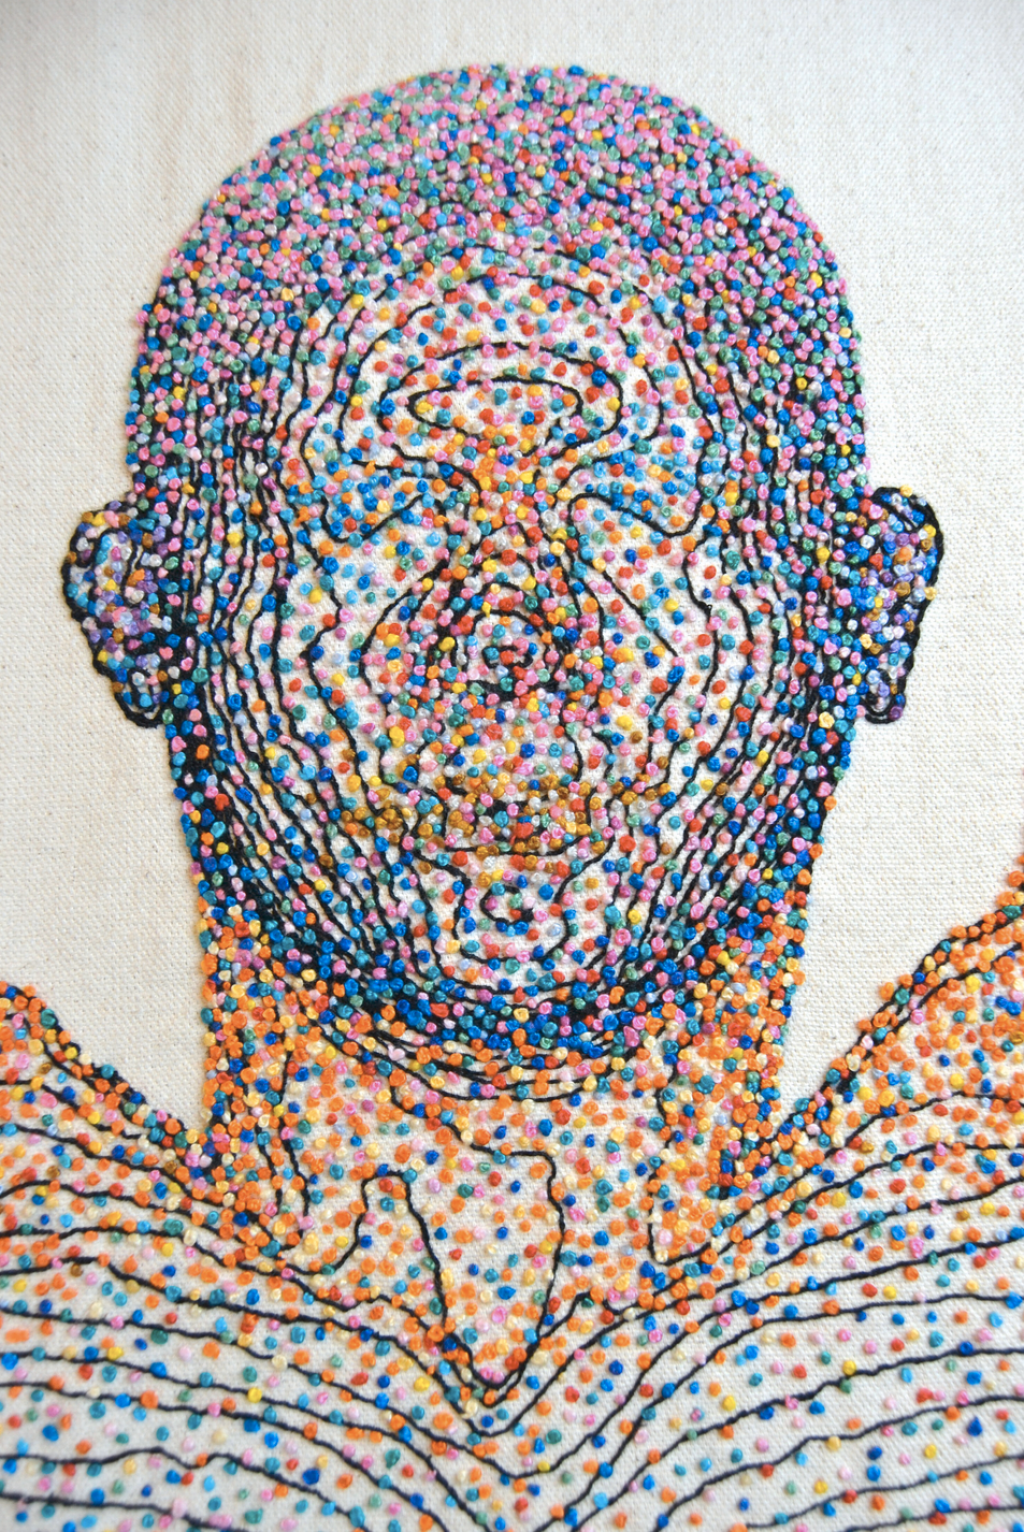 art showing a network shaped like a human face.